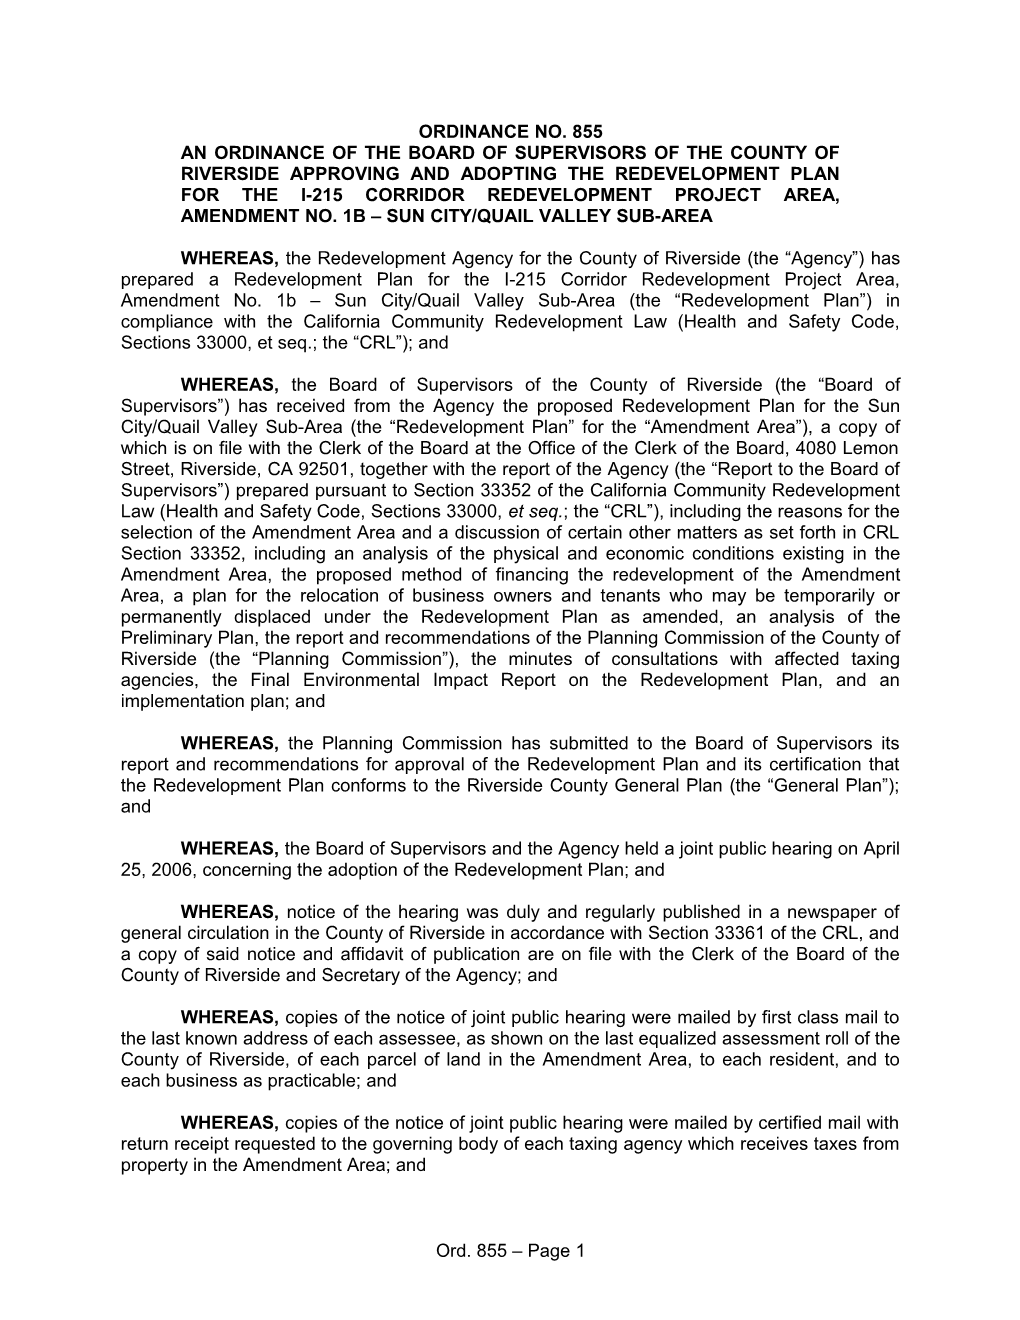 An Ordinance of the Board of Supervisors of the County of Riverside Approving and Adopting